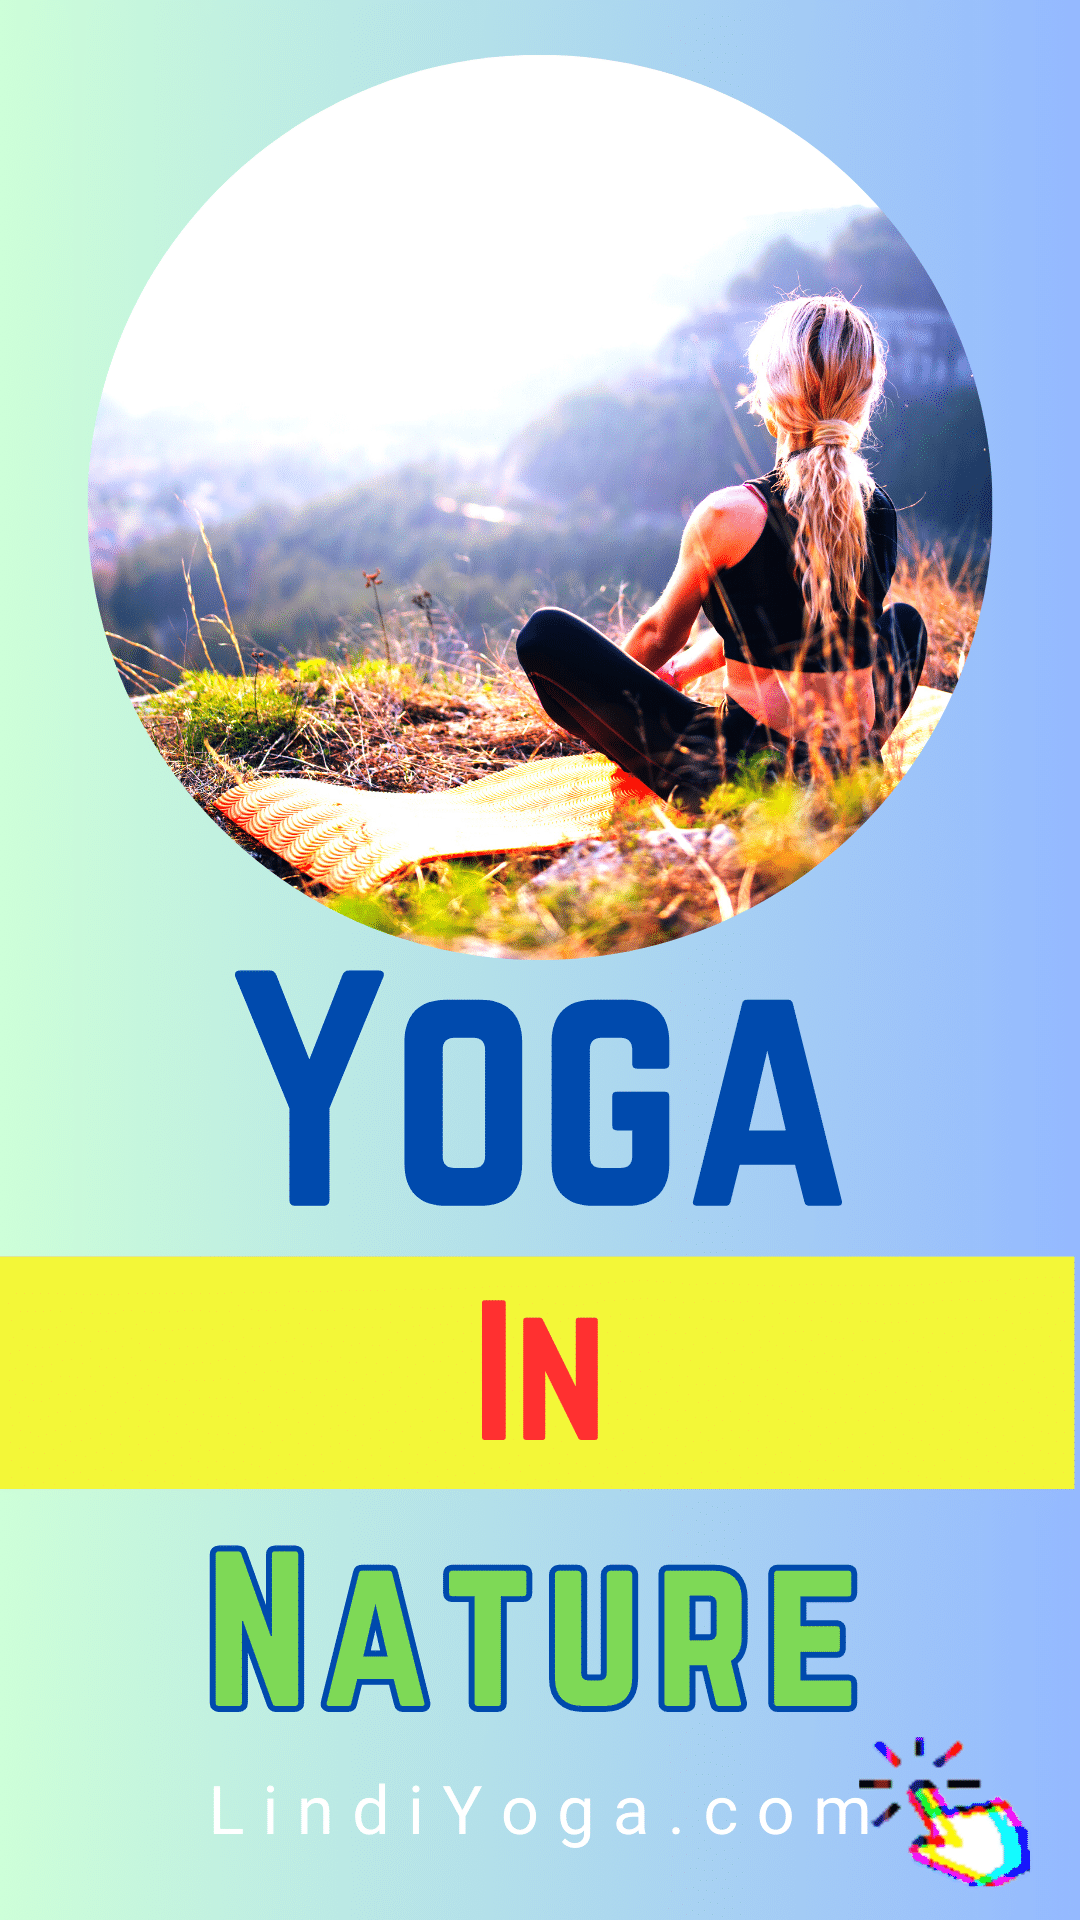 Practicing Yoga in Nature / Canva